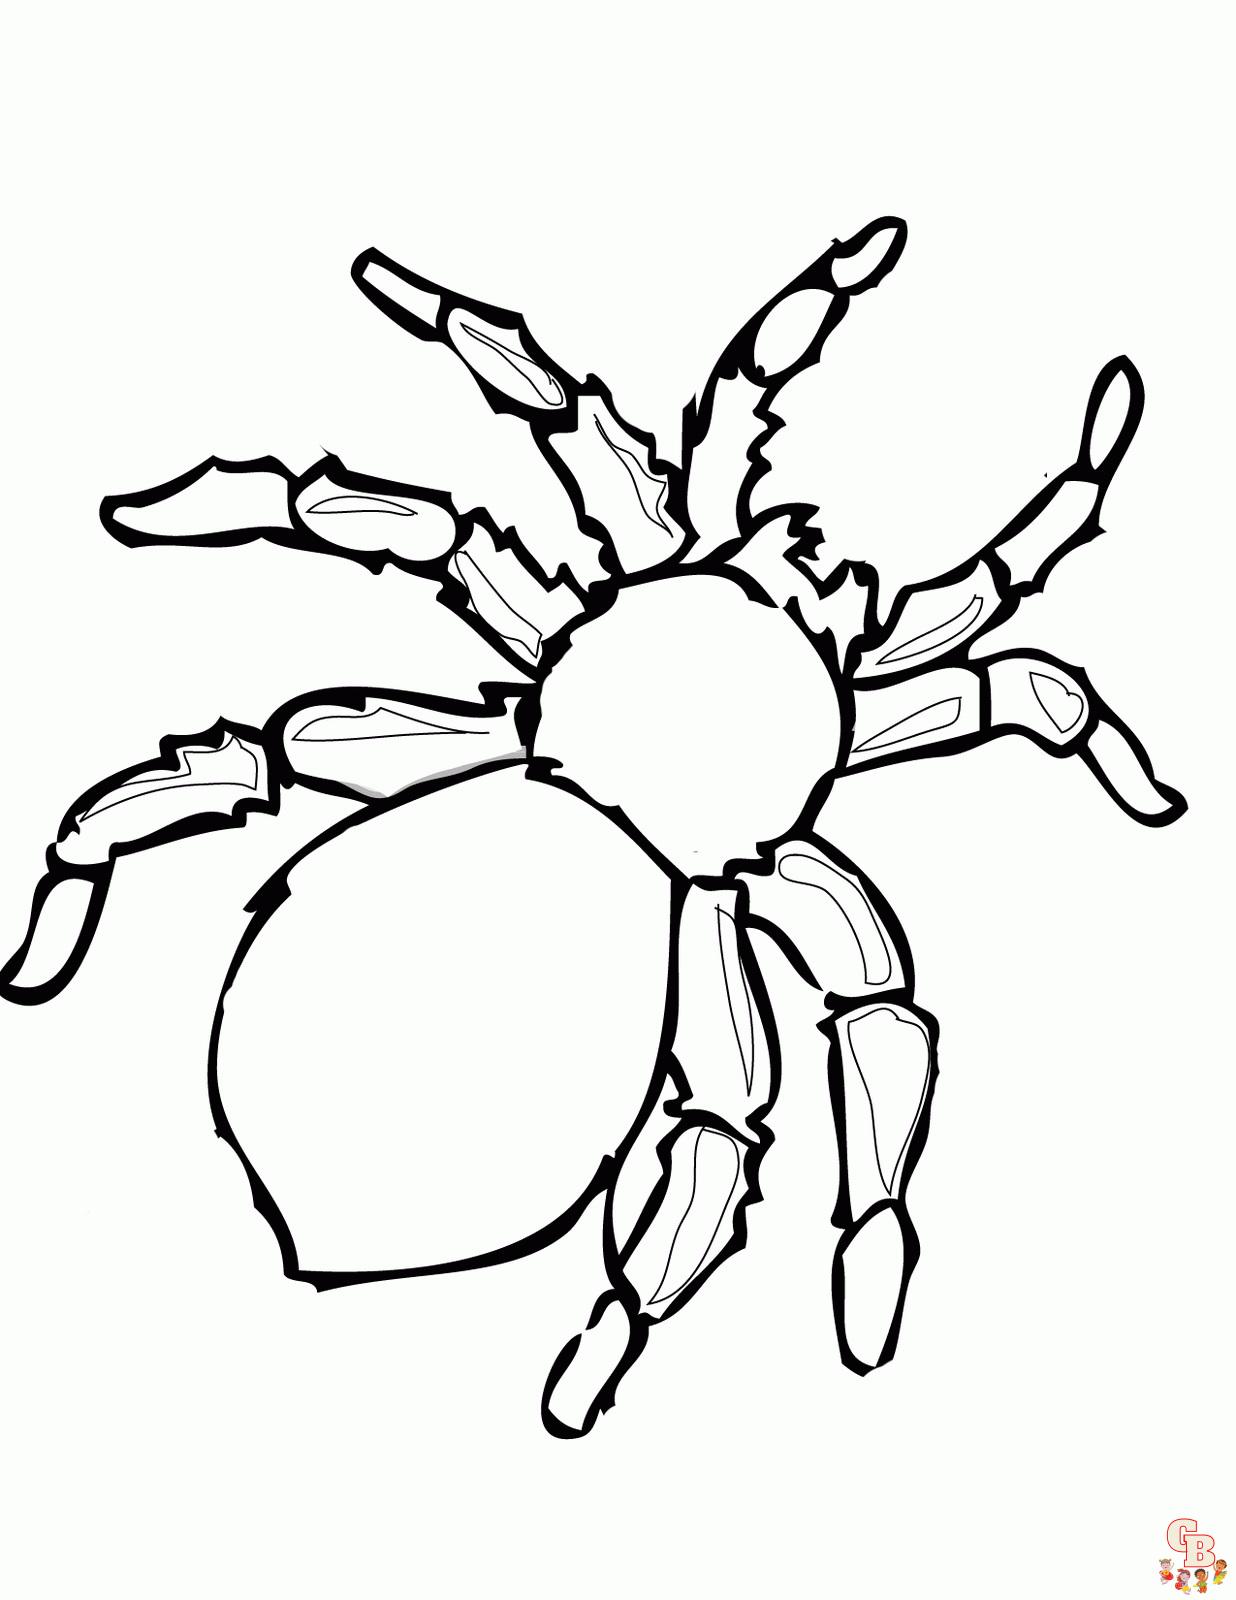 Unleash your childs creativity with spider coloring pages